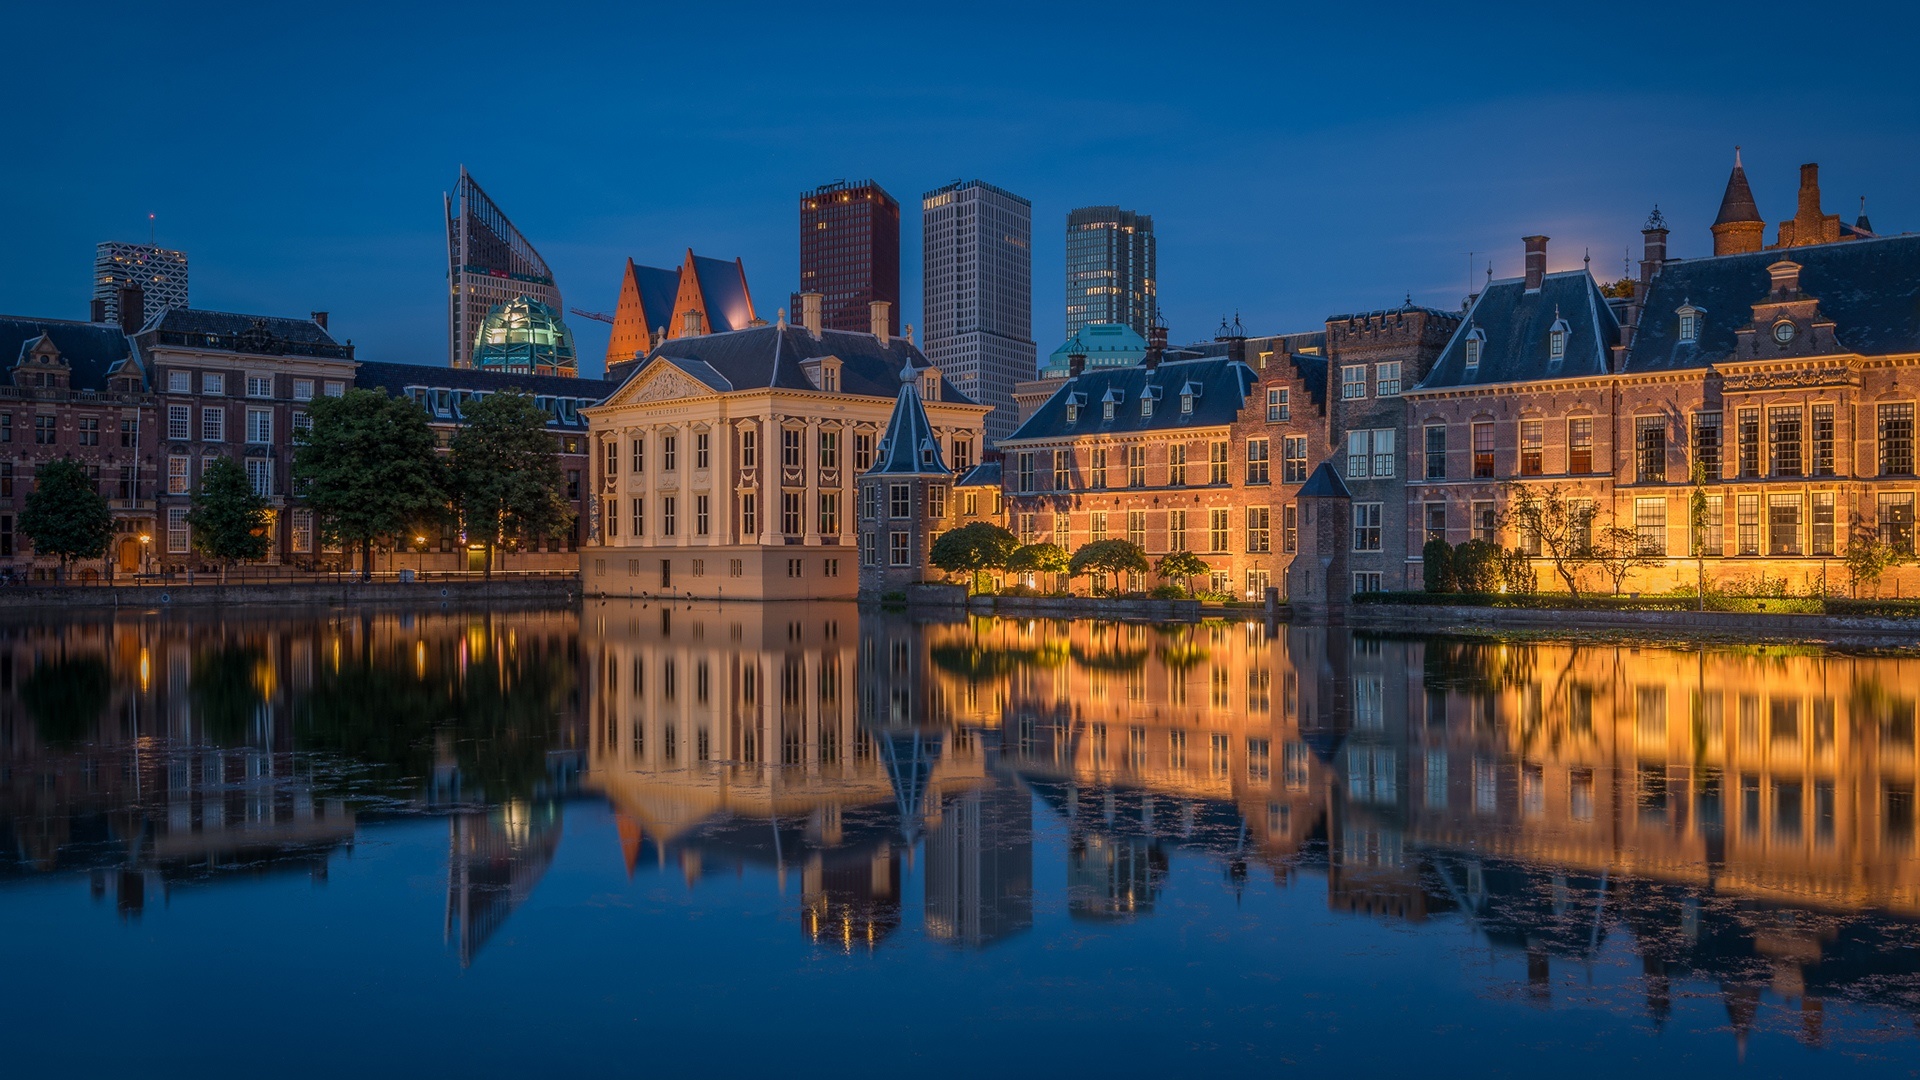 Man Made The Hague HD Wallpaper | Background Image